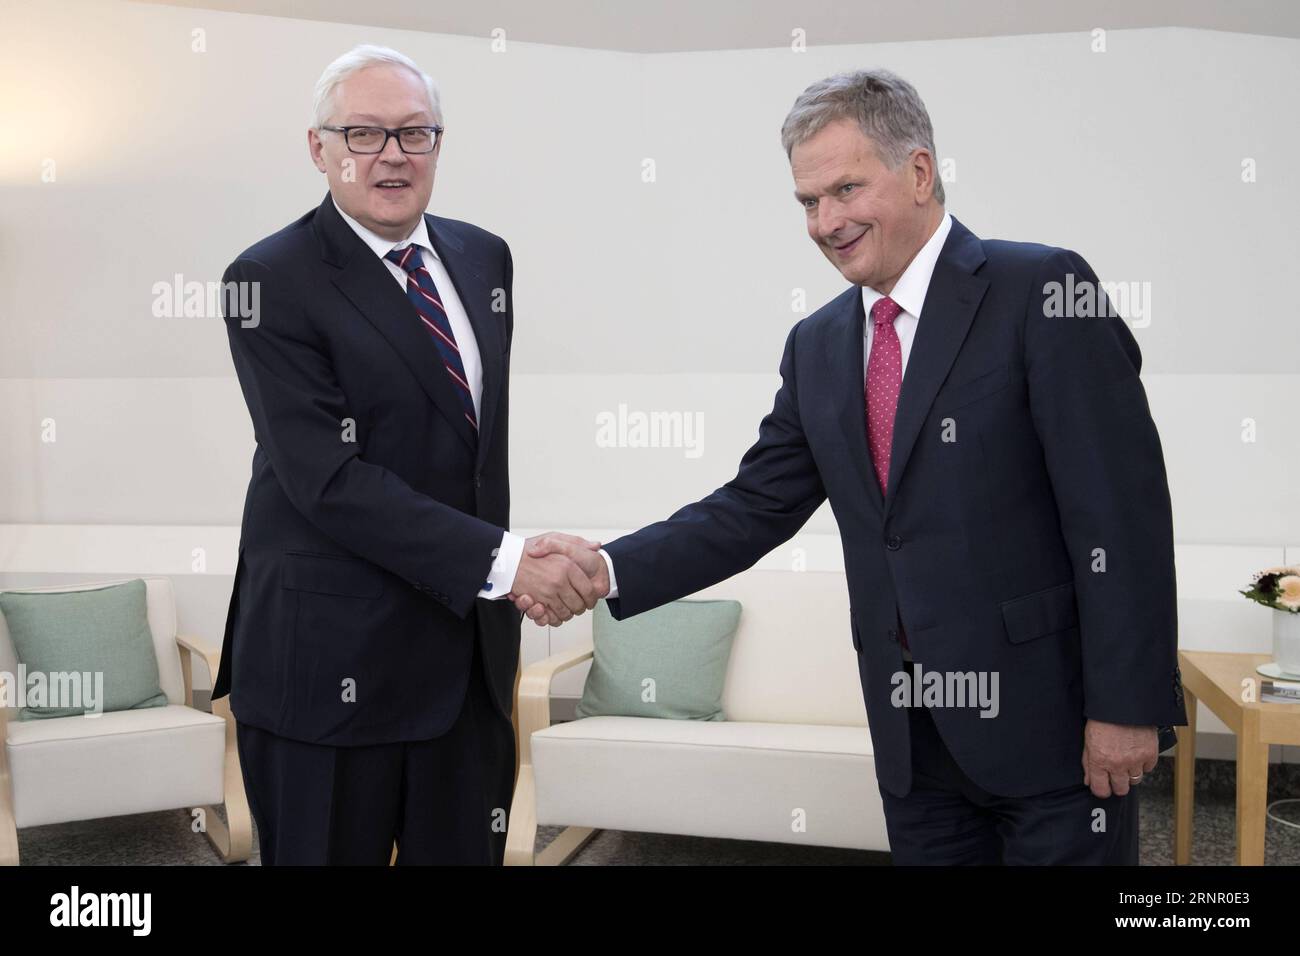 (170912) -- HELSINKI, Sept. 12, 2017 -- Finnish President Sauli Niinisto (R) shakes hands with Russian Deputy Foreign Minister Sergei Ryabkov before their meeting in Helsinki, Finland on Sept. 12, 2017. Finnish President Sauli Niinisto on Tuesday met Russian Deputy Foreign Minister Sergei Ryabkov. The meeting took place on the second day of the U.S.-Russian dialogue in Helsinki. Niinisto had met U.S. undersecretary of state Thomas Shannon on Monday. ) FINLAND-HELSINKI-PRESIDENT-RUSSIA-DEPUTY FM-MEETING MattixMatikainen PUBLICATIONxNOTxINxCHN Stock Photo